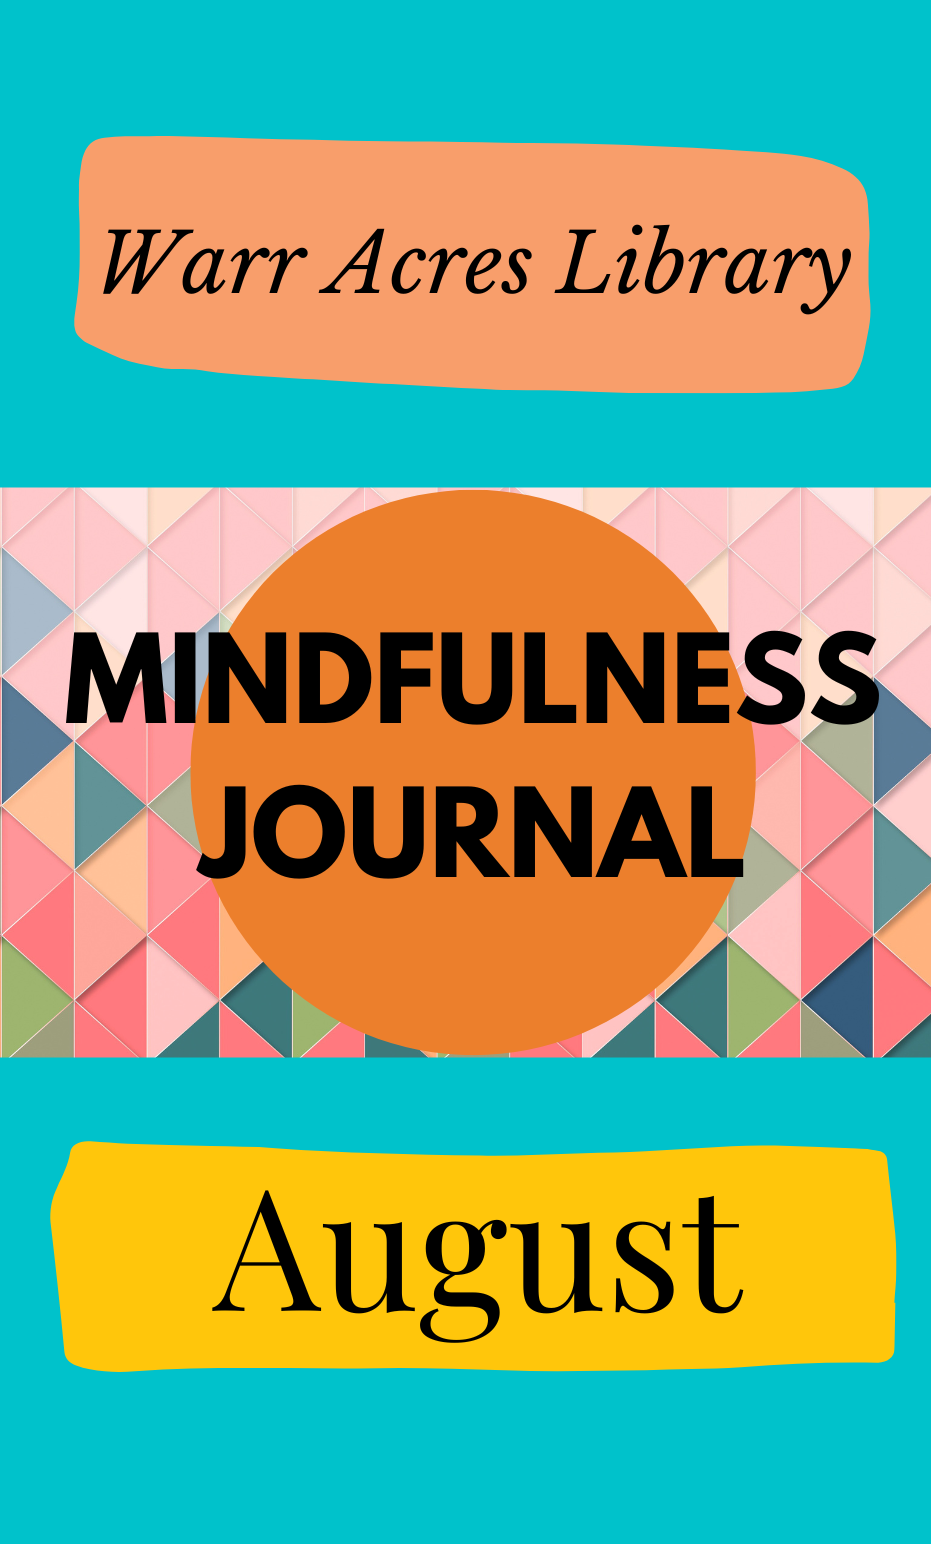 A colorful cover that says, "Warr Acres Library Mindfulness Journal August."